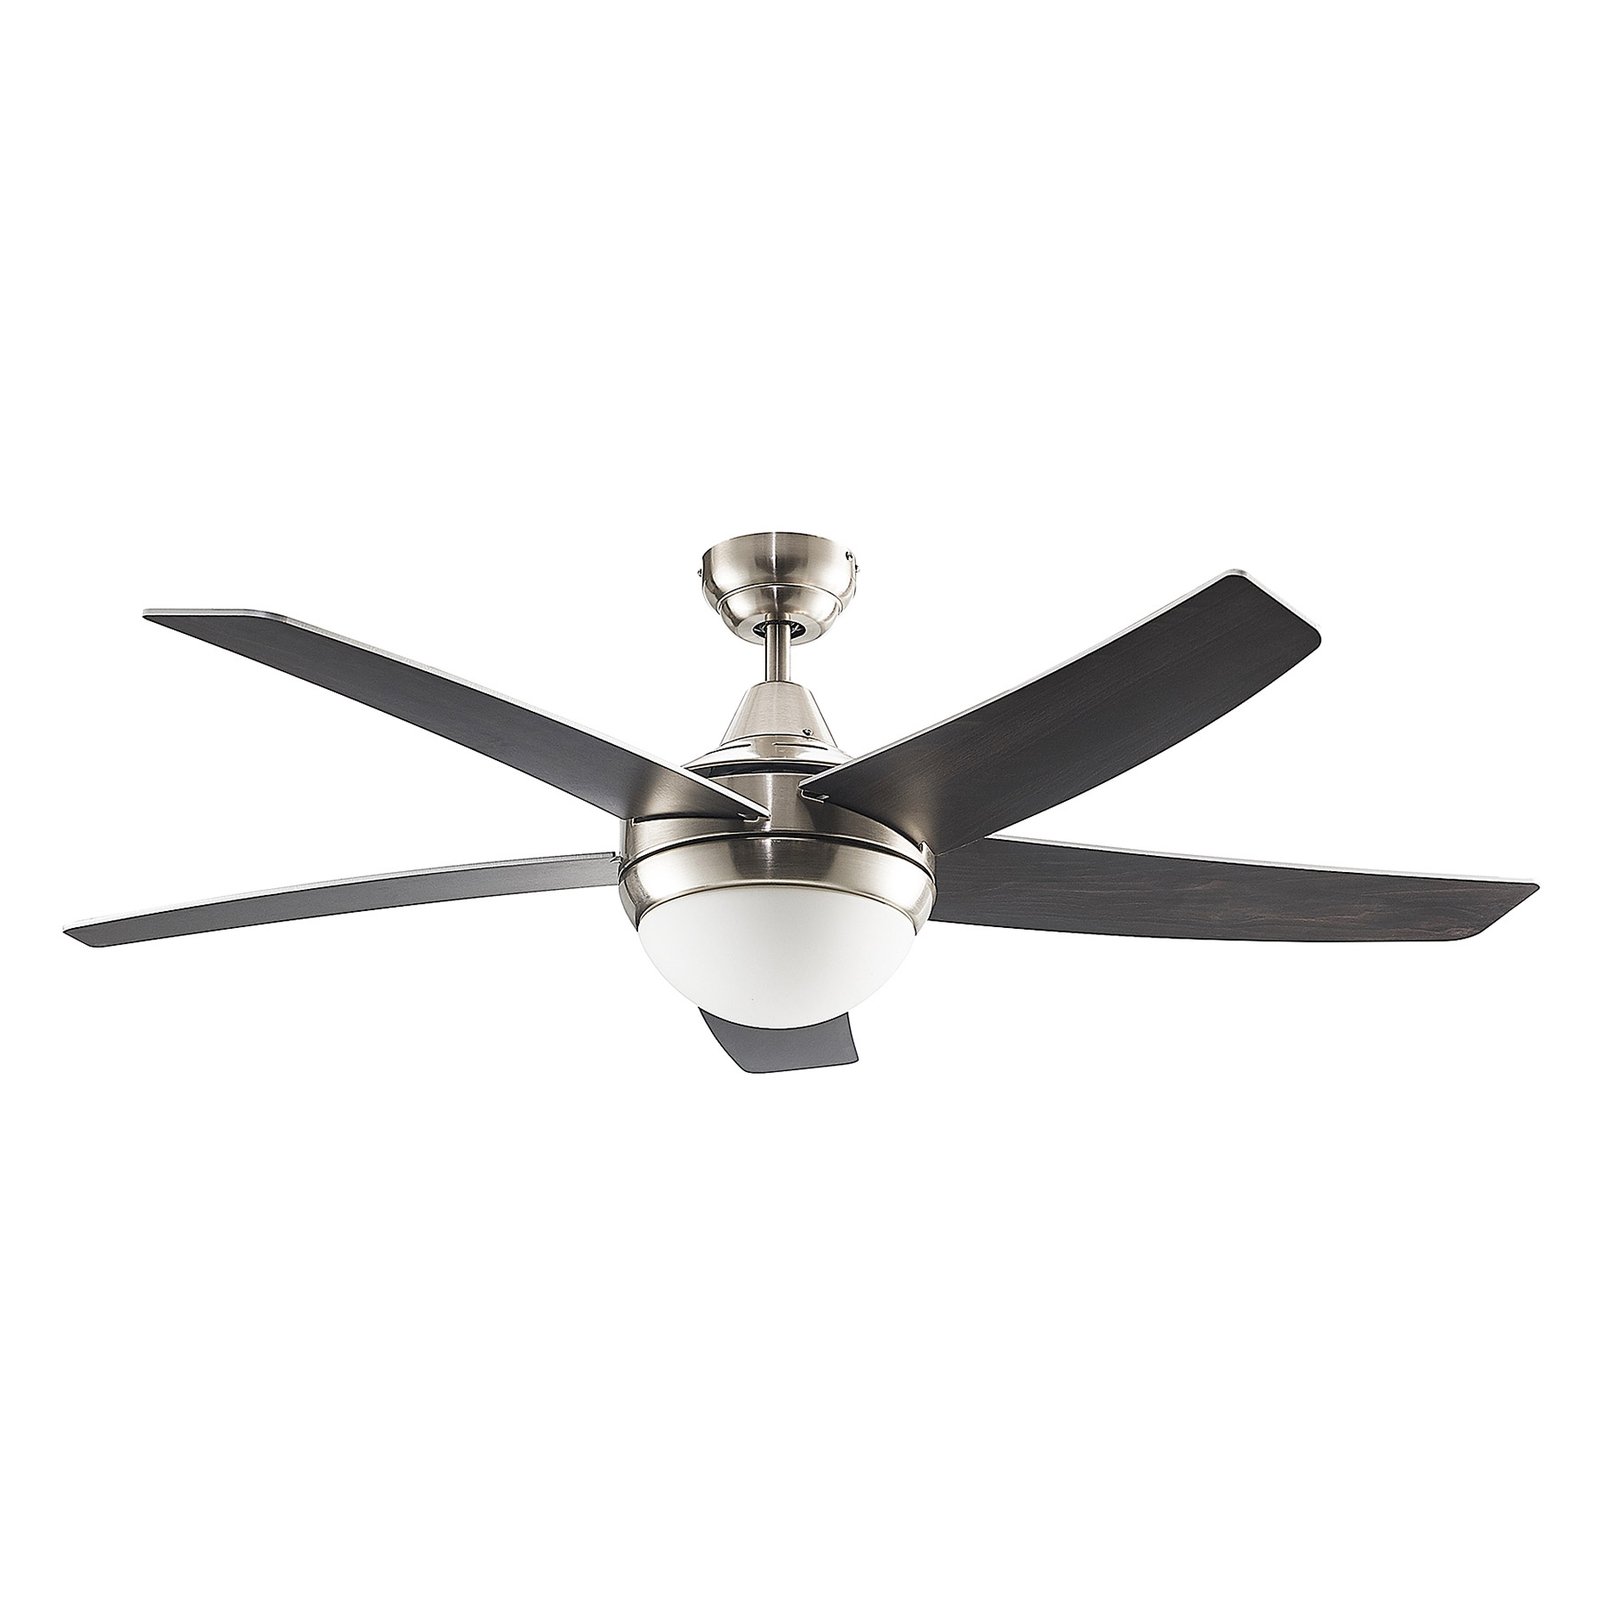 Lindby ceiling fan with light Auraya, quiet, steel